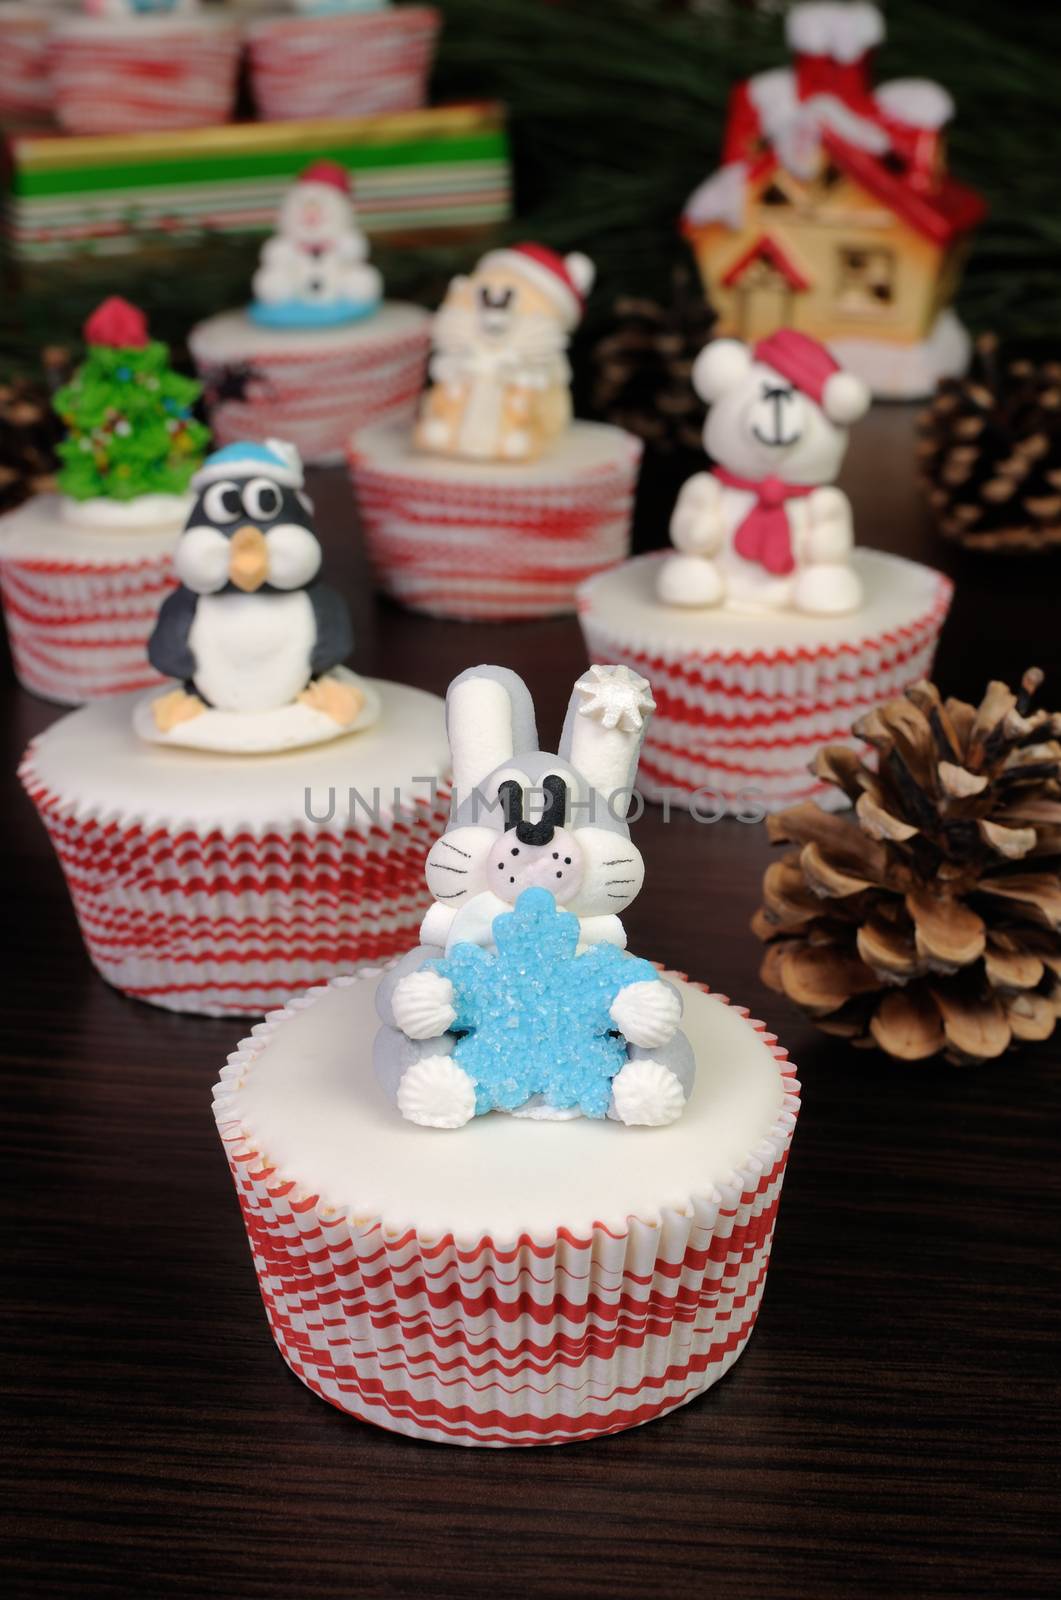 Sugar Christmas figurine rabbit with snowflakes on muffin